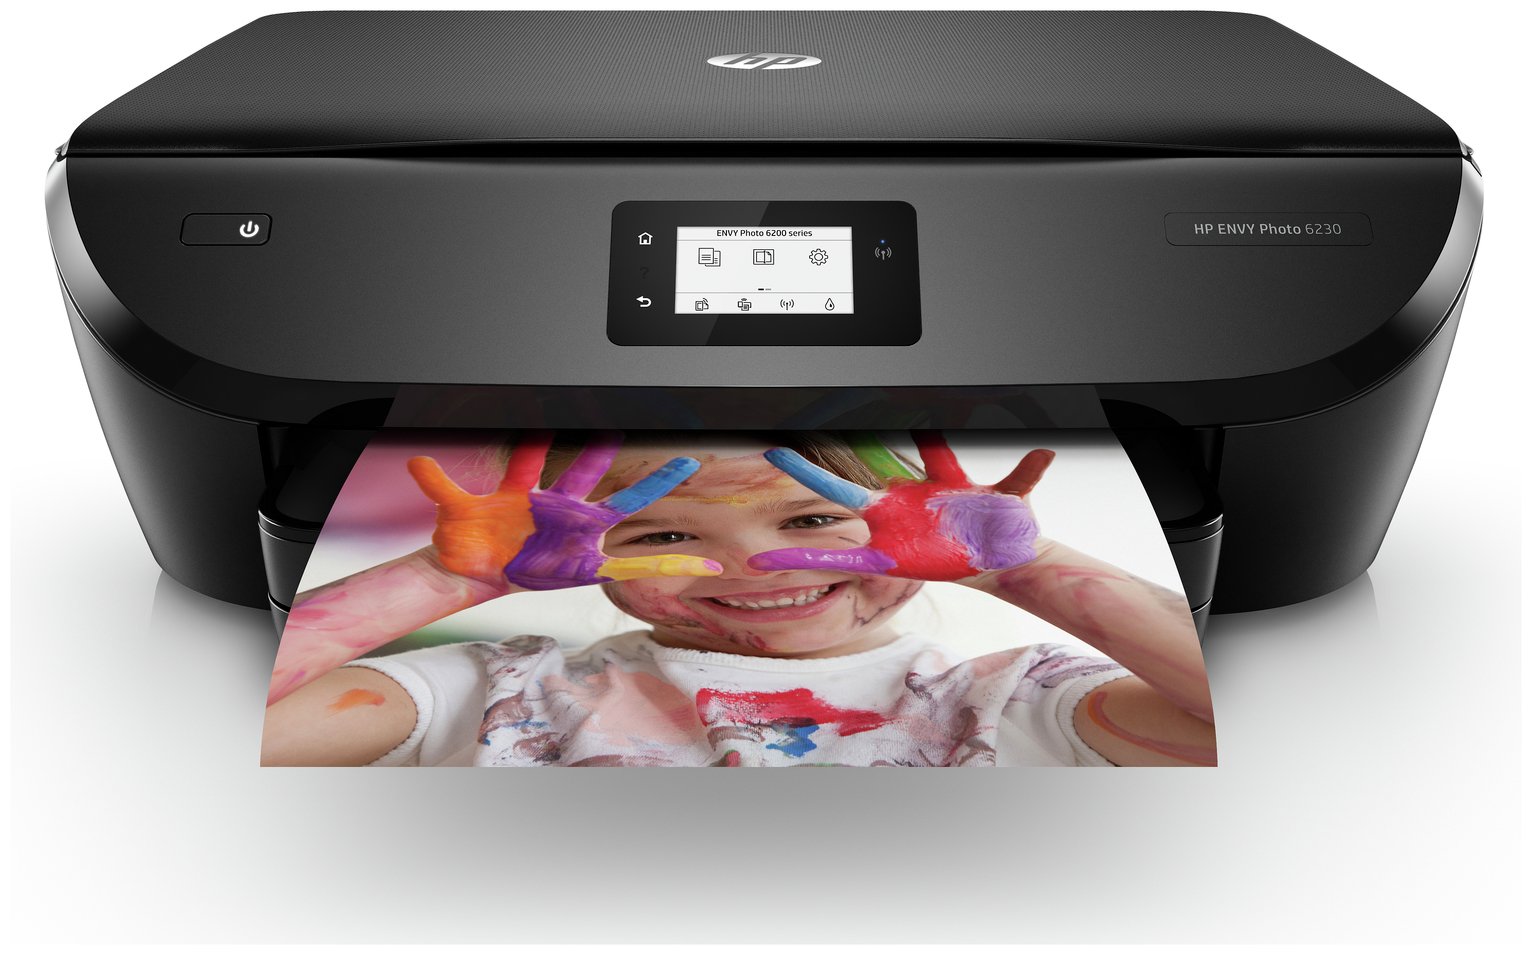 HP Envy 6230 All-in-One Photo Printer & Instant Ink Trial review